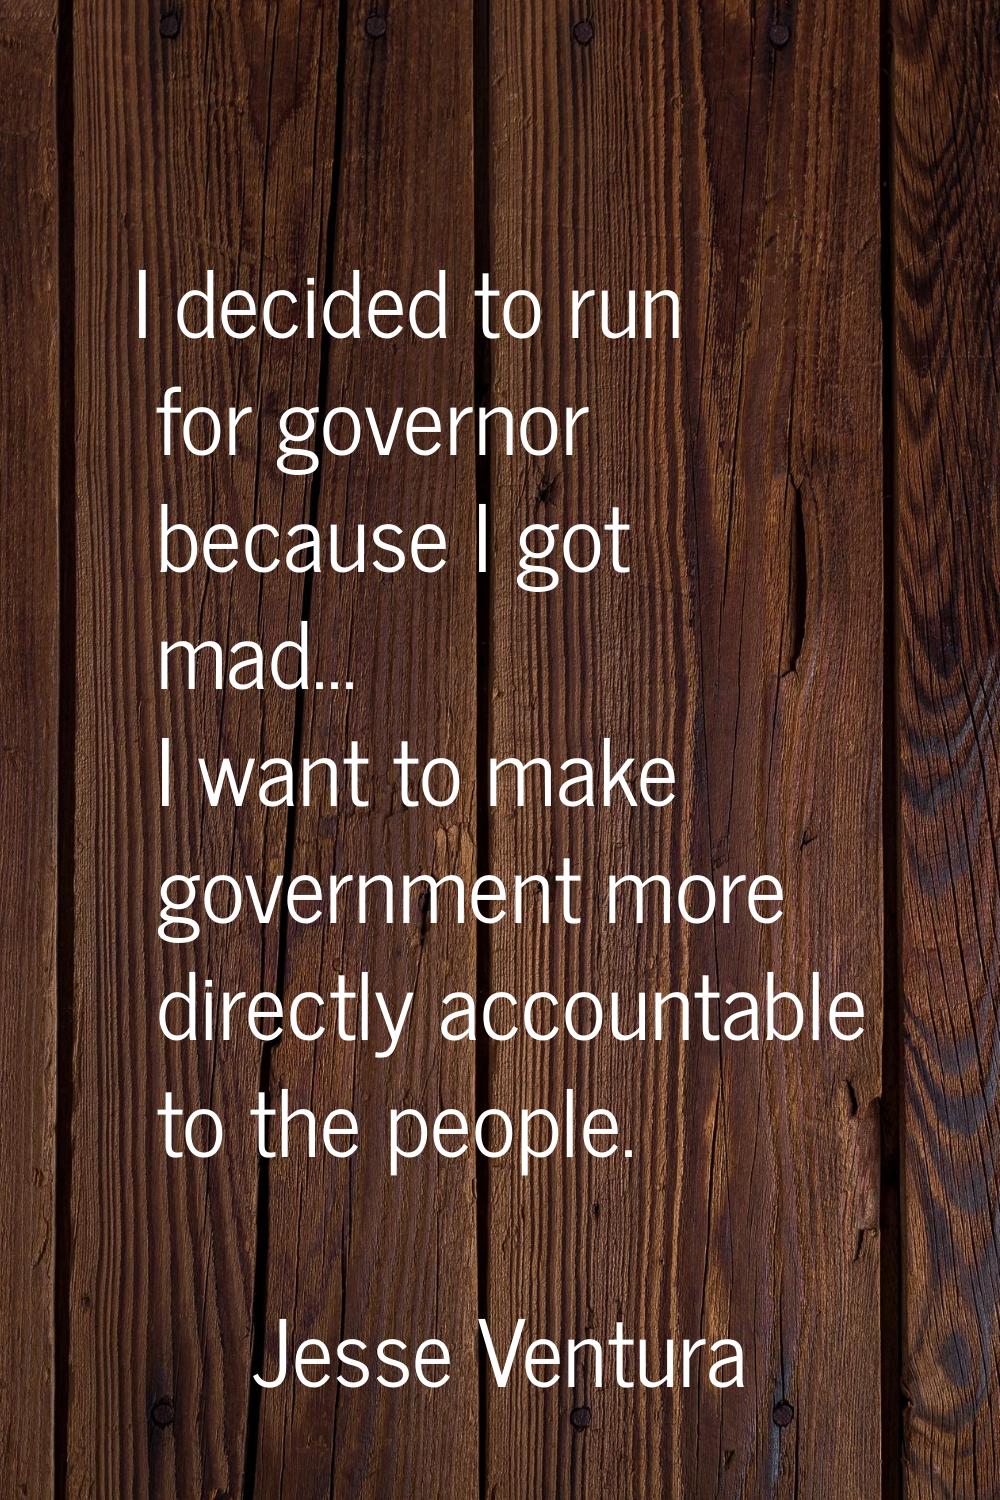 I decided to run for governor because I got mad... I want to make government more directly accounta